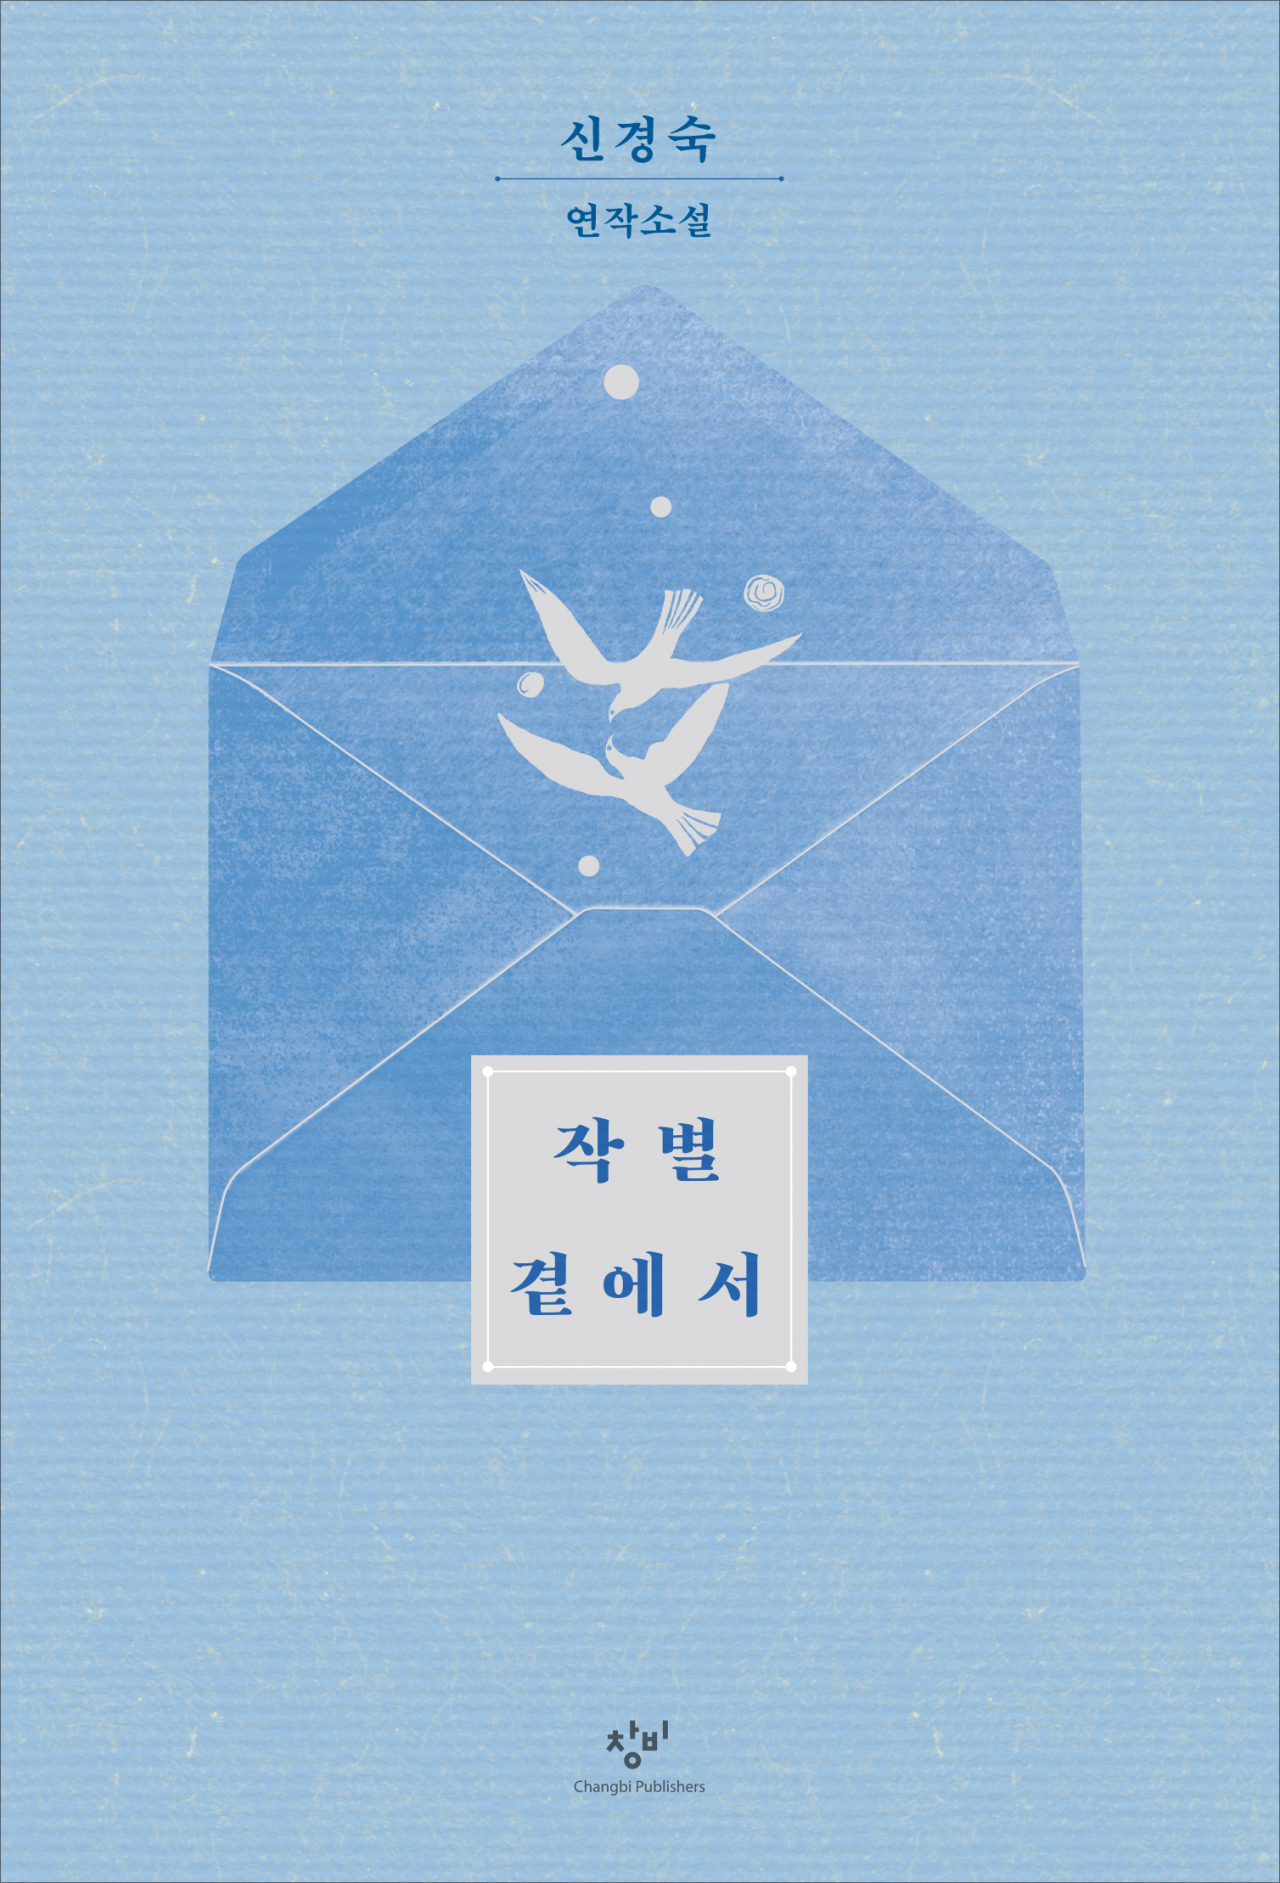 “On the Eve of Goodbye” by Shin Kyung-sook (Changbi Publishers)